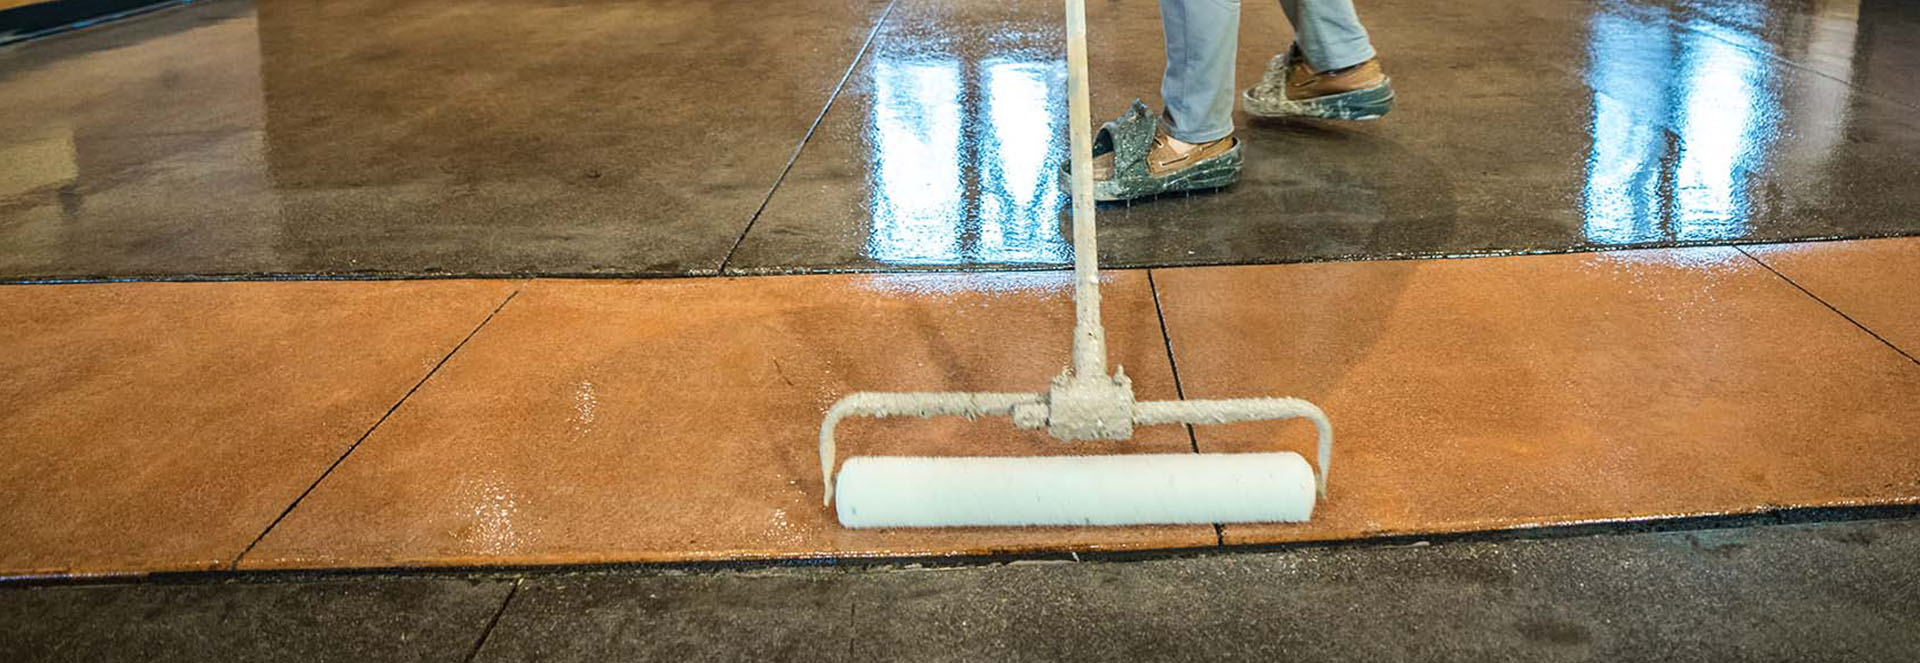 Floor Repair Systems  Yellowstone Structural Systems